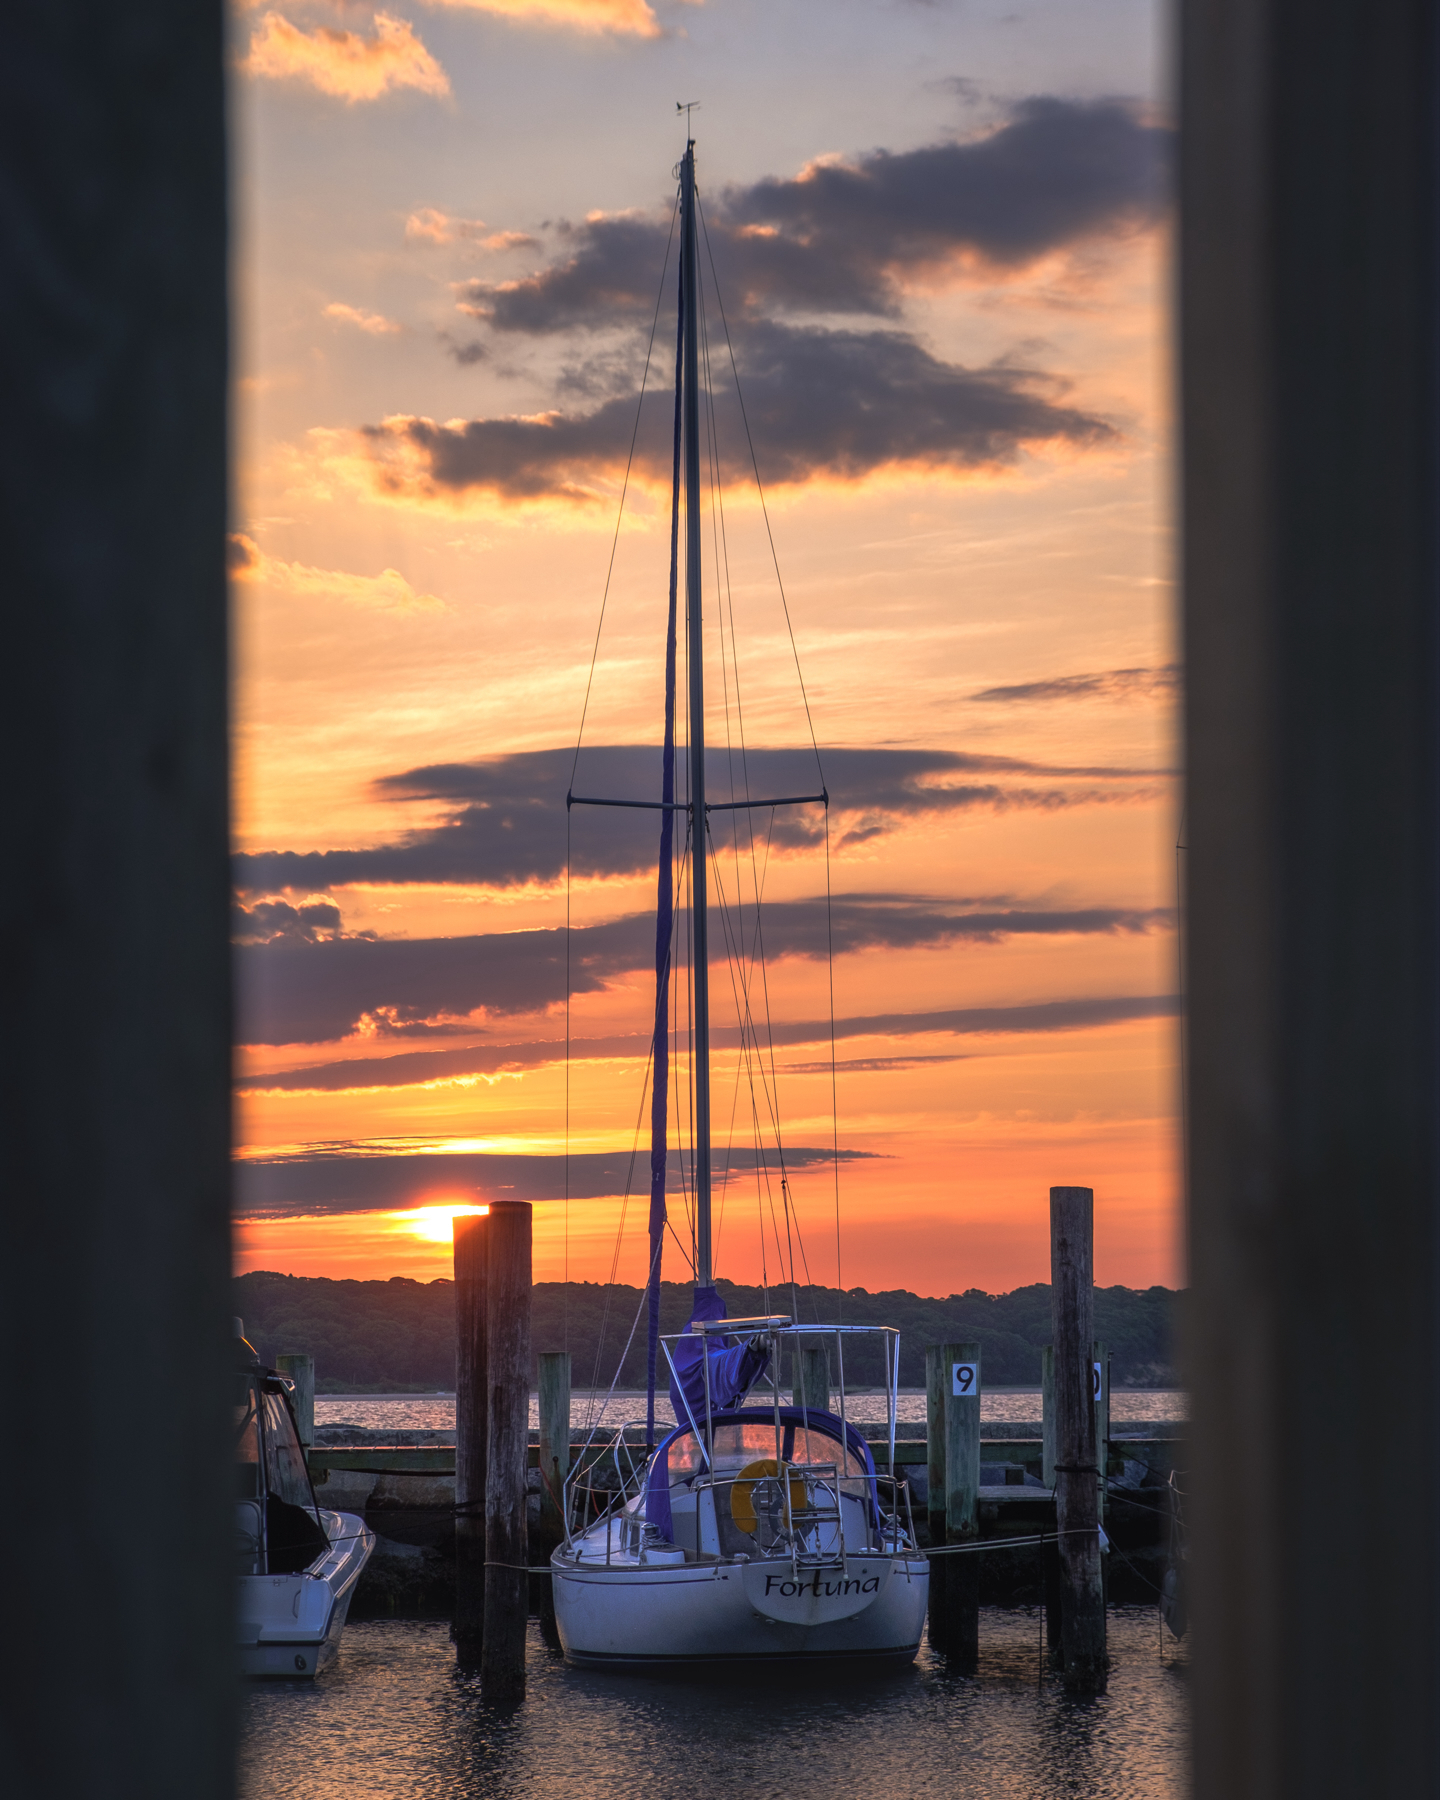 A sailboat docked at a marina during a sunrise, framed by two vertical wooden posts. The boat’s name “Fortuna” is visible on the stern. The sky is painted with warm hues of orange and pink, with purple clouds scattered above